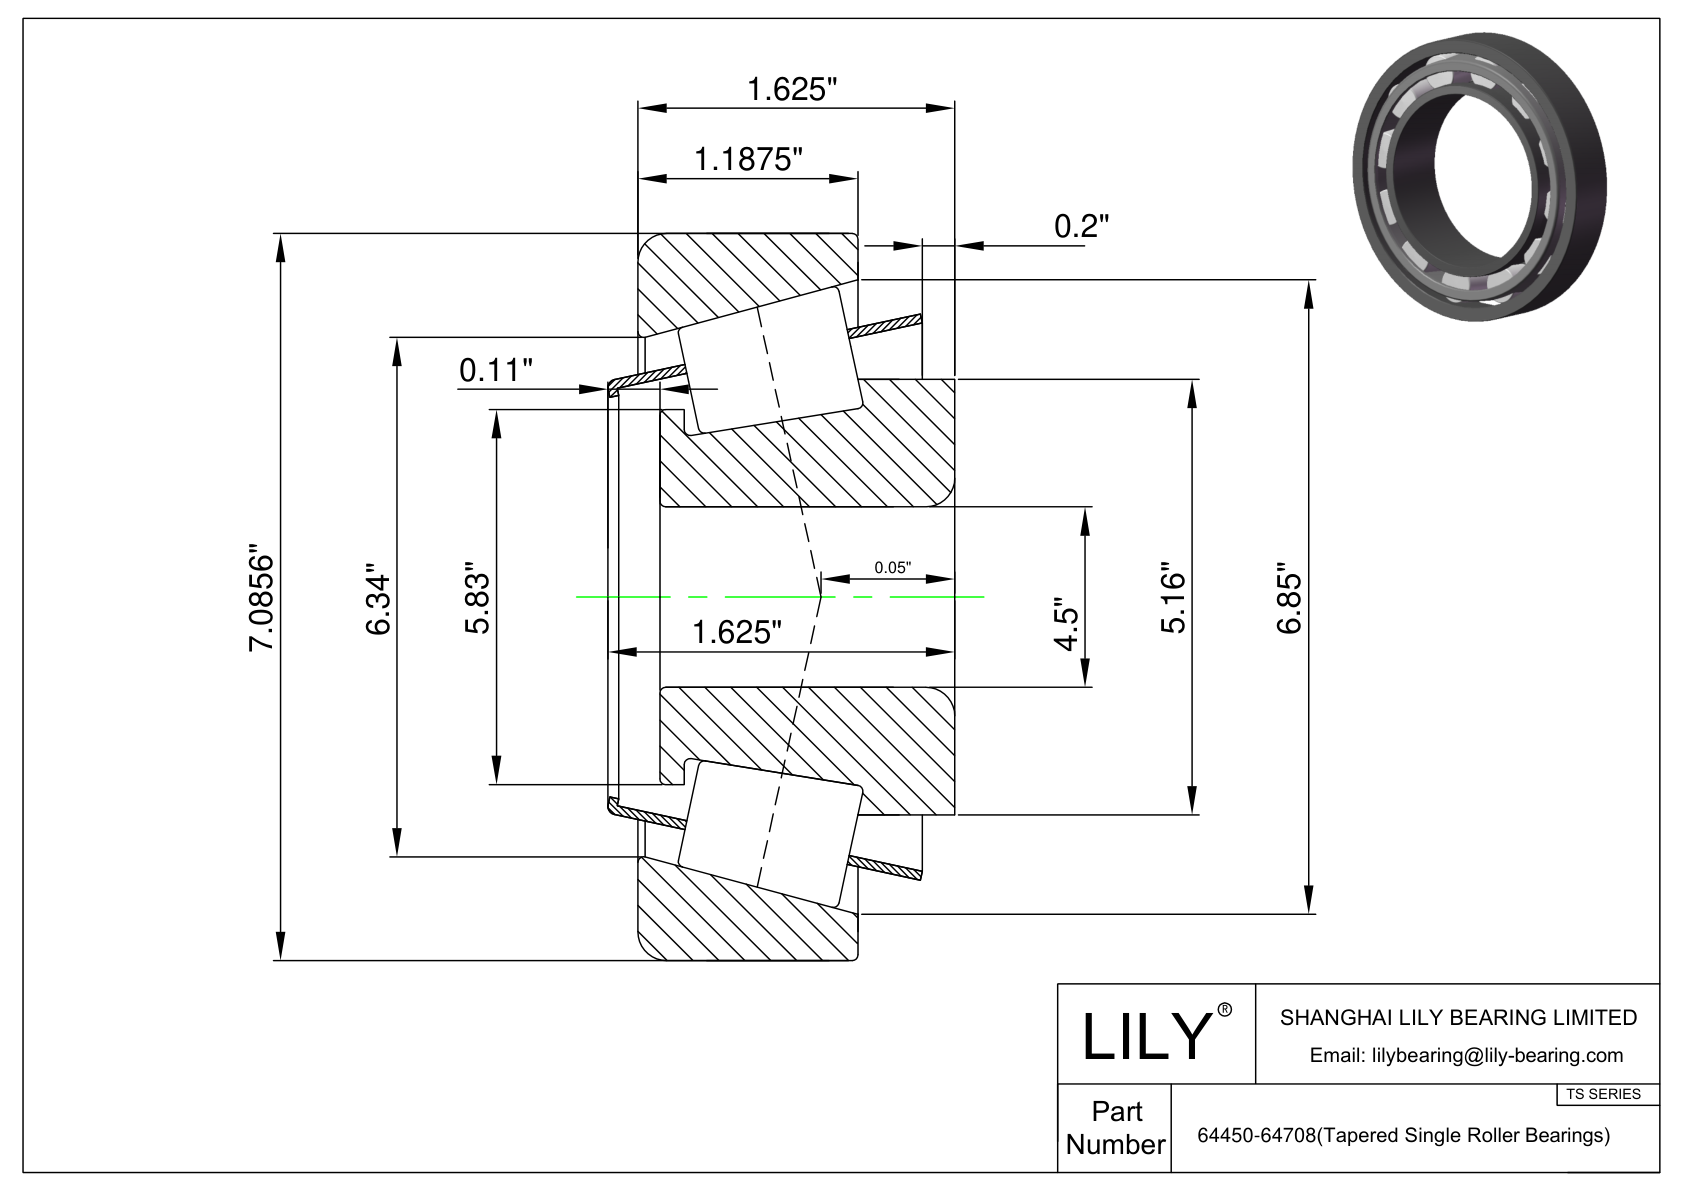 64450-64708 TS (Tapered Single Roller Bearings) (Imperial) cad drawing